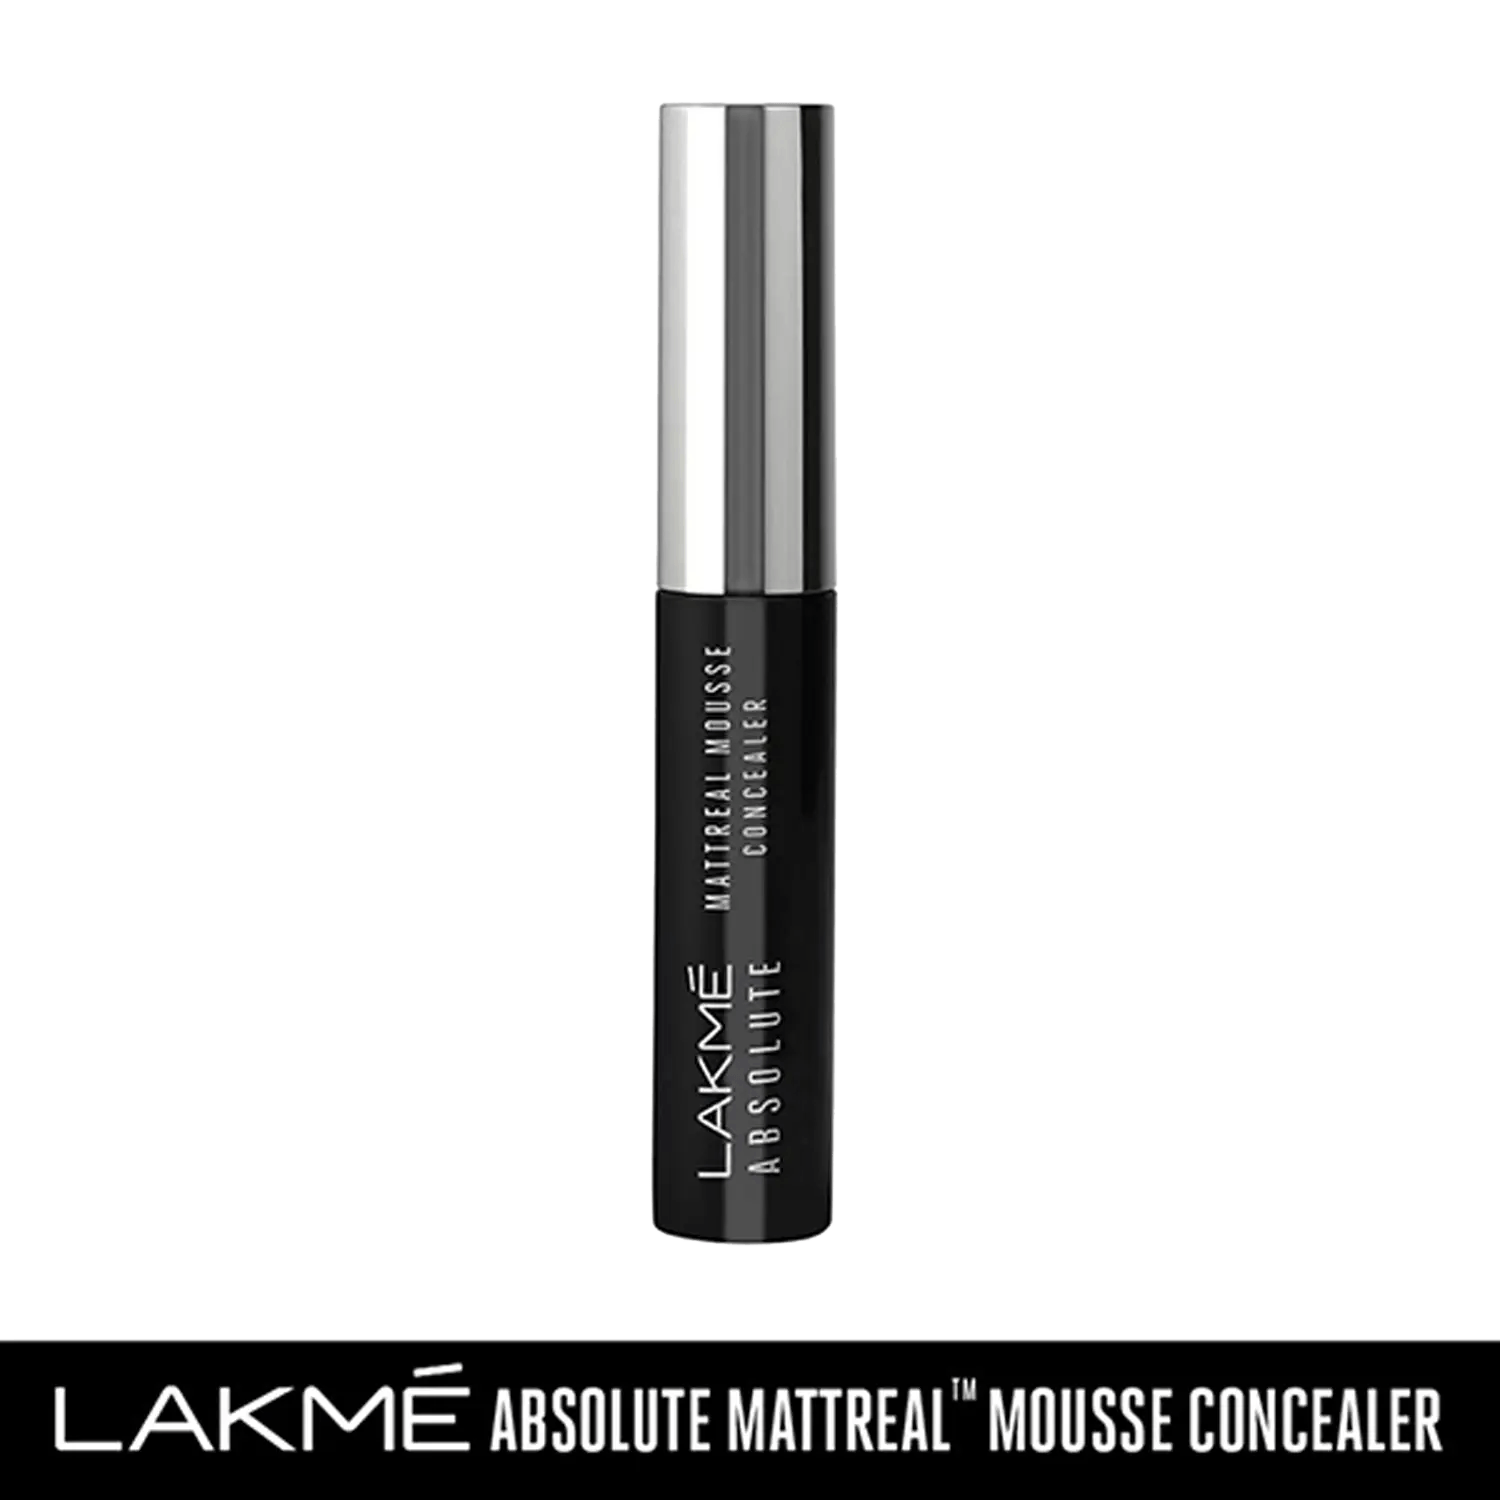 Lakme | Lakme Absolute Mattereal Mousse Concealer - 03 Honey (9g)